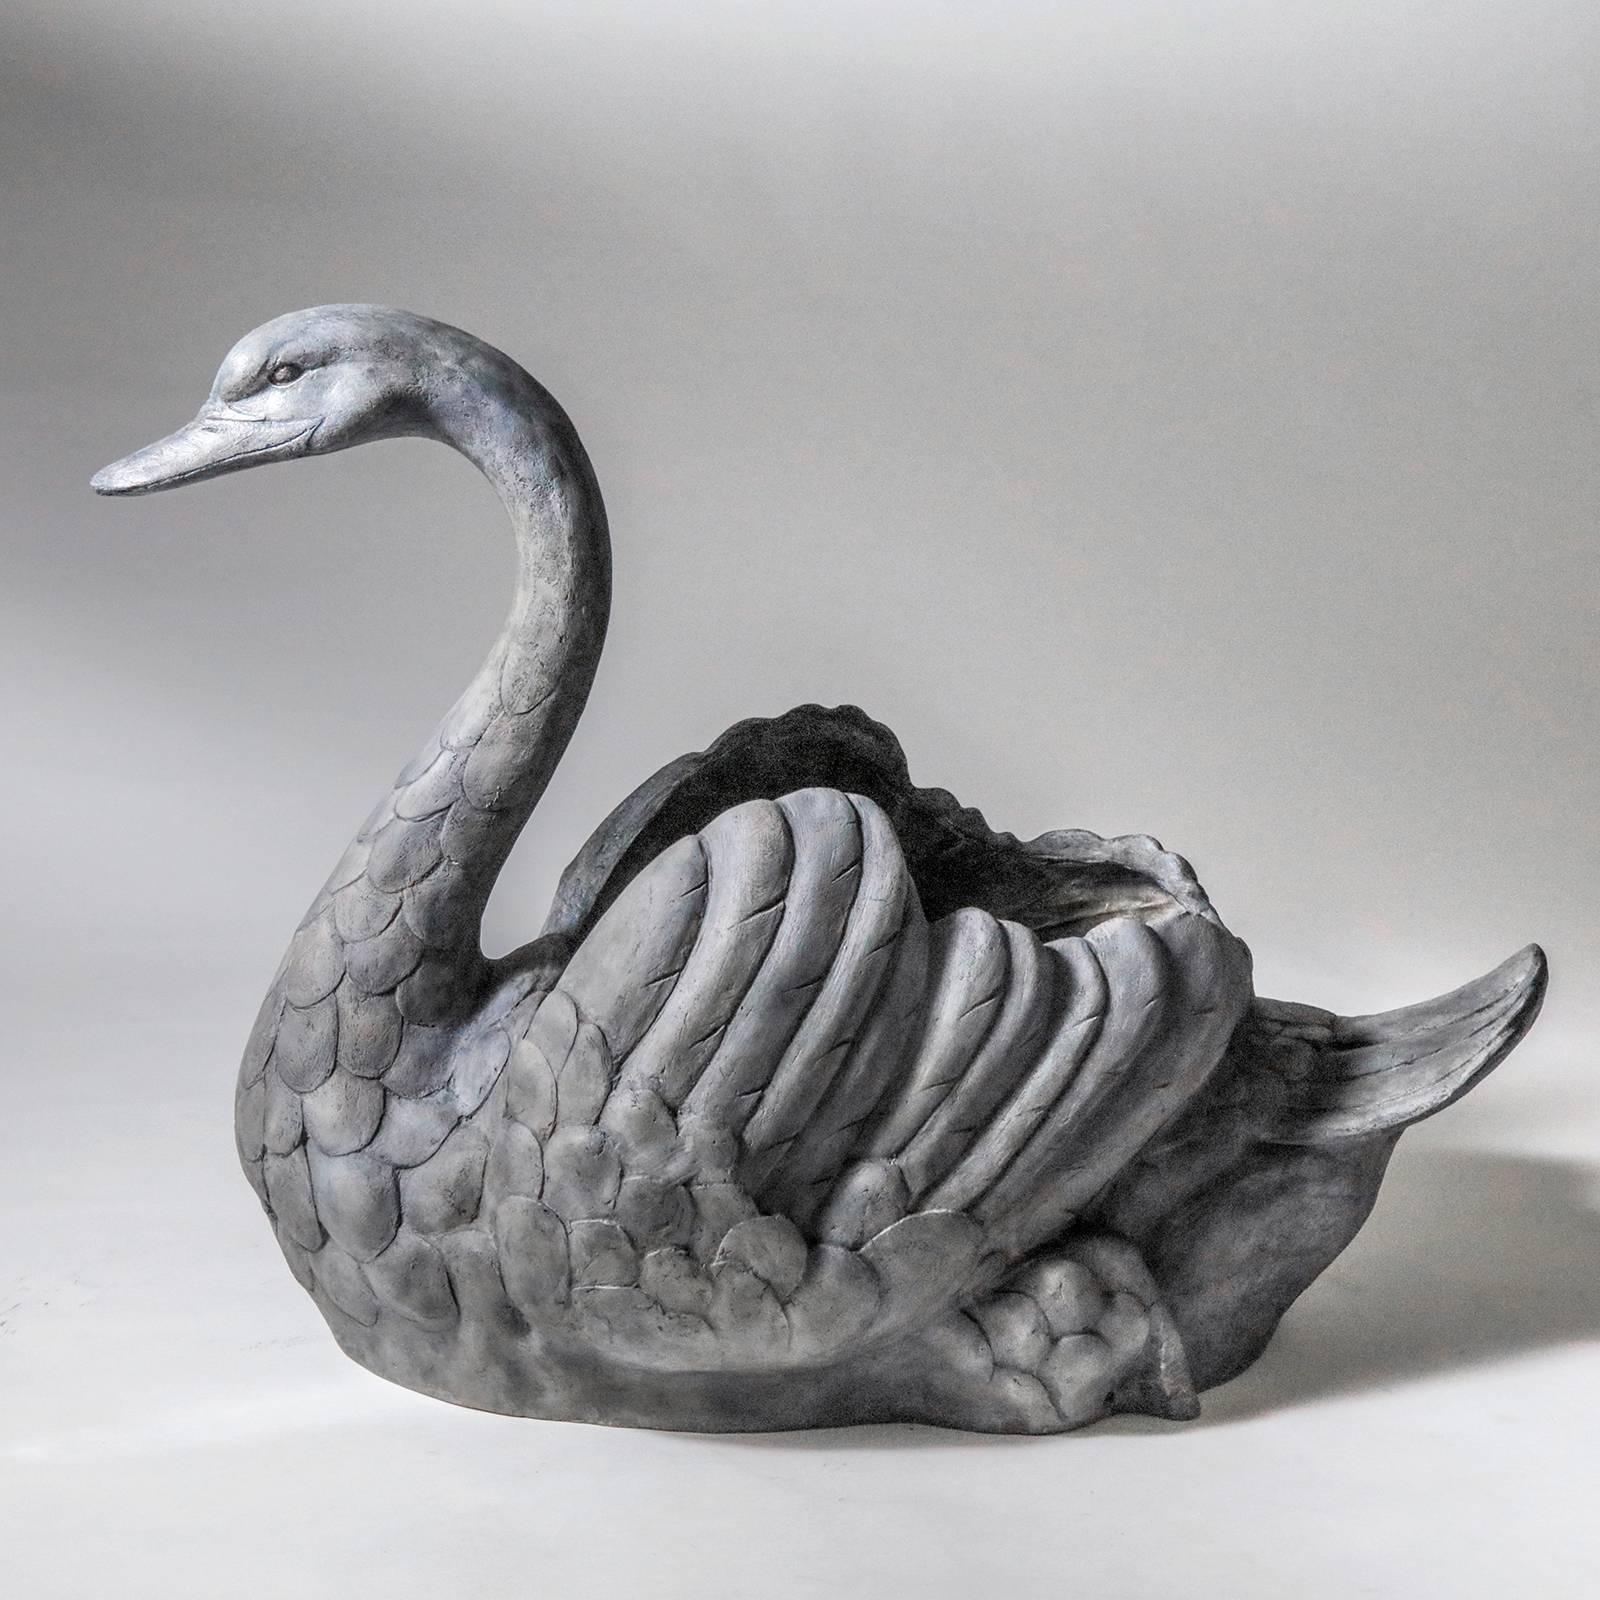 One-of-a-kind pair of identically matched large swan planters. Created in a resin, then given a hand-painted distressed grey patina. From a Classic garden design that Linda has in her own garden! Re-creation exclusive to Linda Horn.